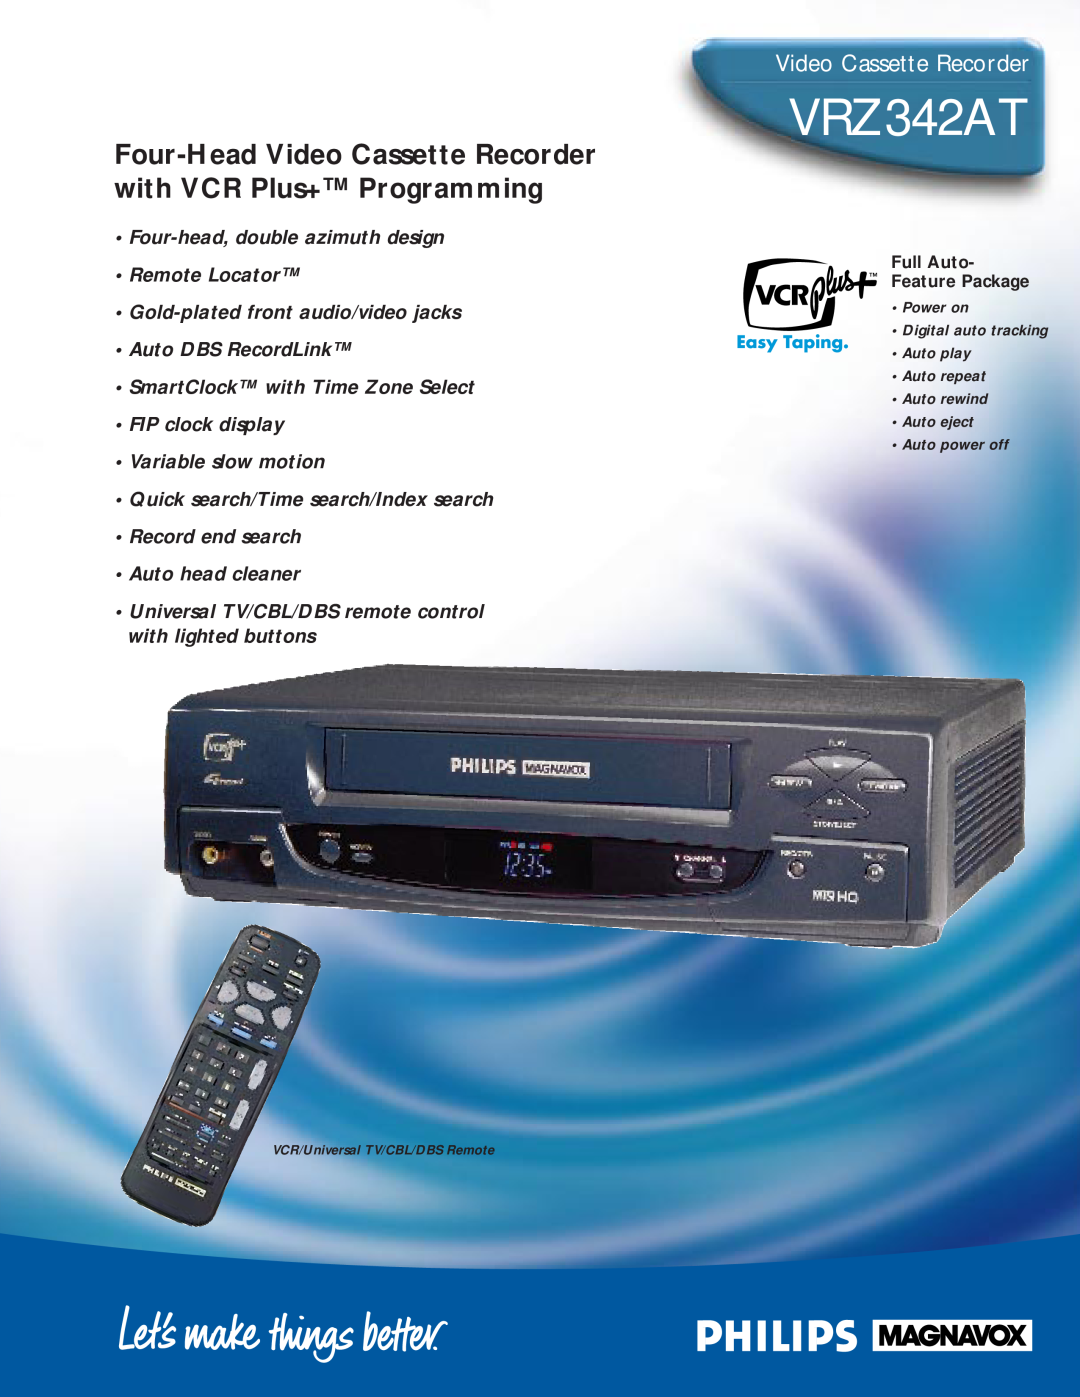 Philips VRZ342AT manual Four-Head Video Cassette Recorder with VCR Plus+ Programming 